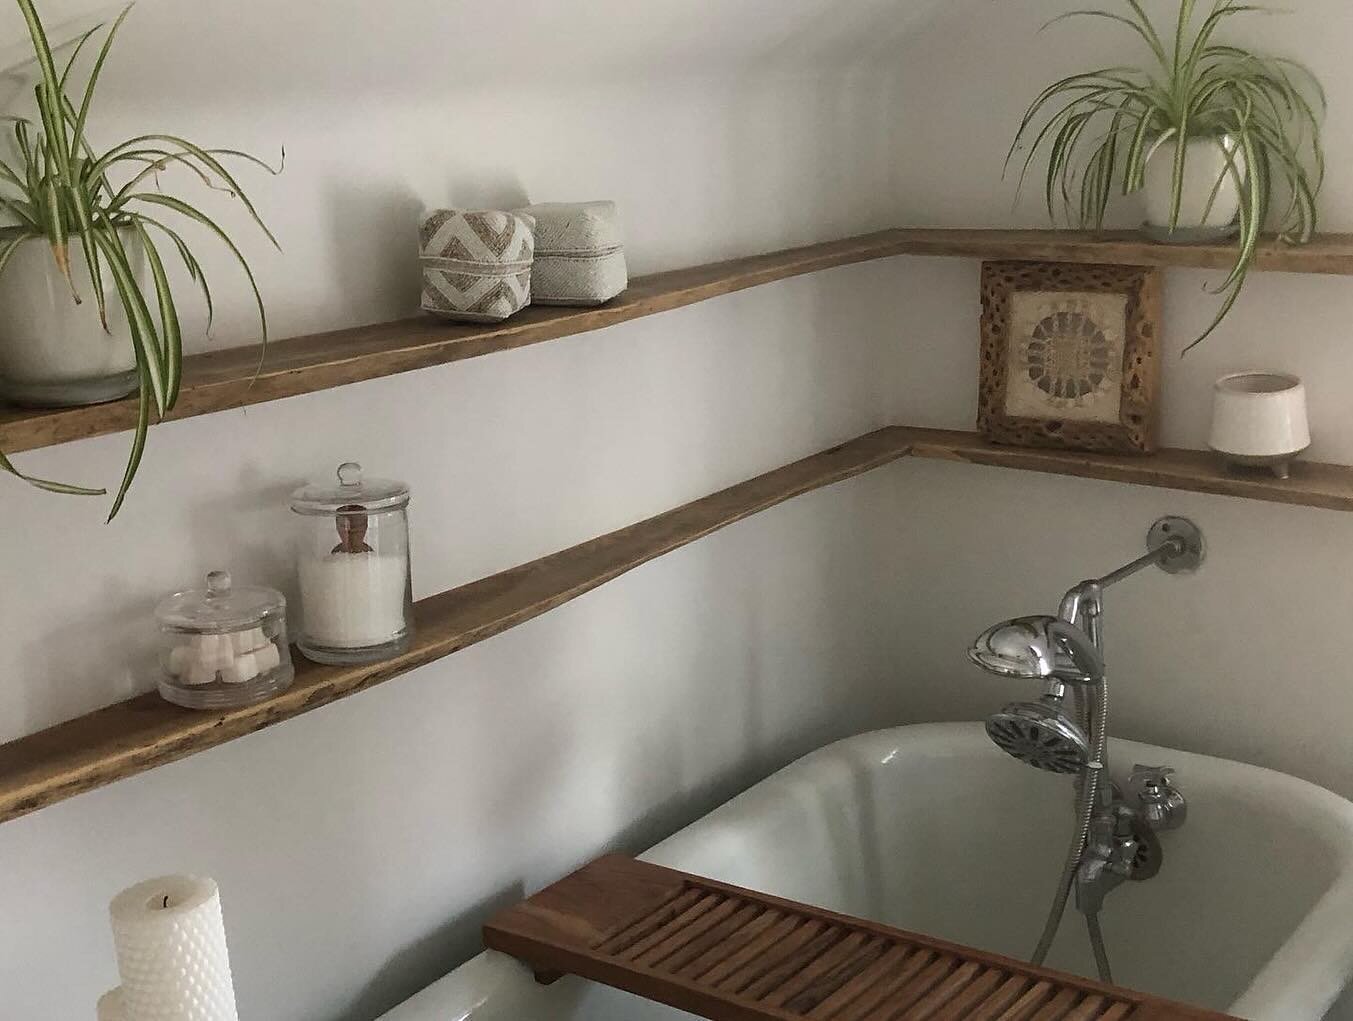 Tis the season for shelves&hellip; some throwback shelves  to get you thinking about your next job!
 

Garden State Surf and Art
8101 Long Beach Boulevard
Long Beach Township, NJ 08008

DM: @gardenstatesurf 
Email: gardenstatesurf@gmail.com
Call/text